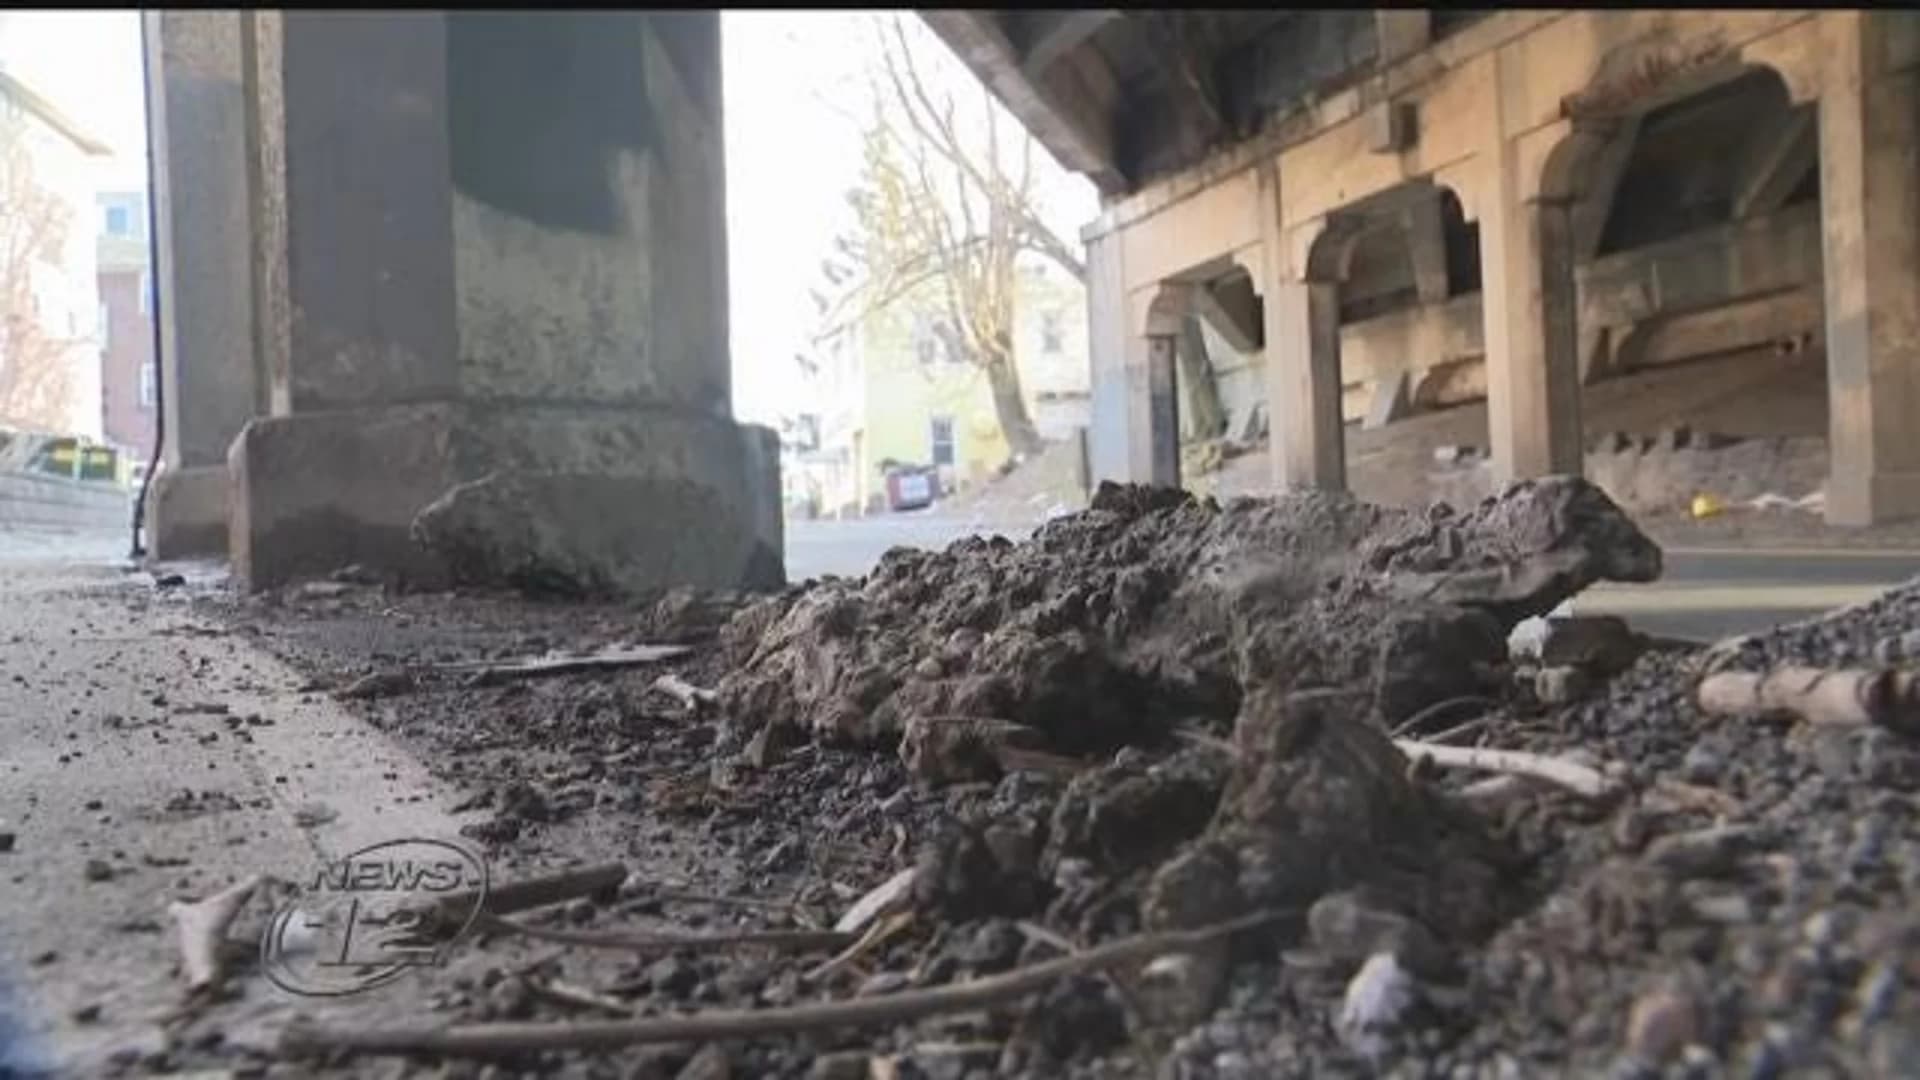 Driver says falling pieces of deteriorating bridge damaged his SUV